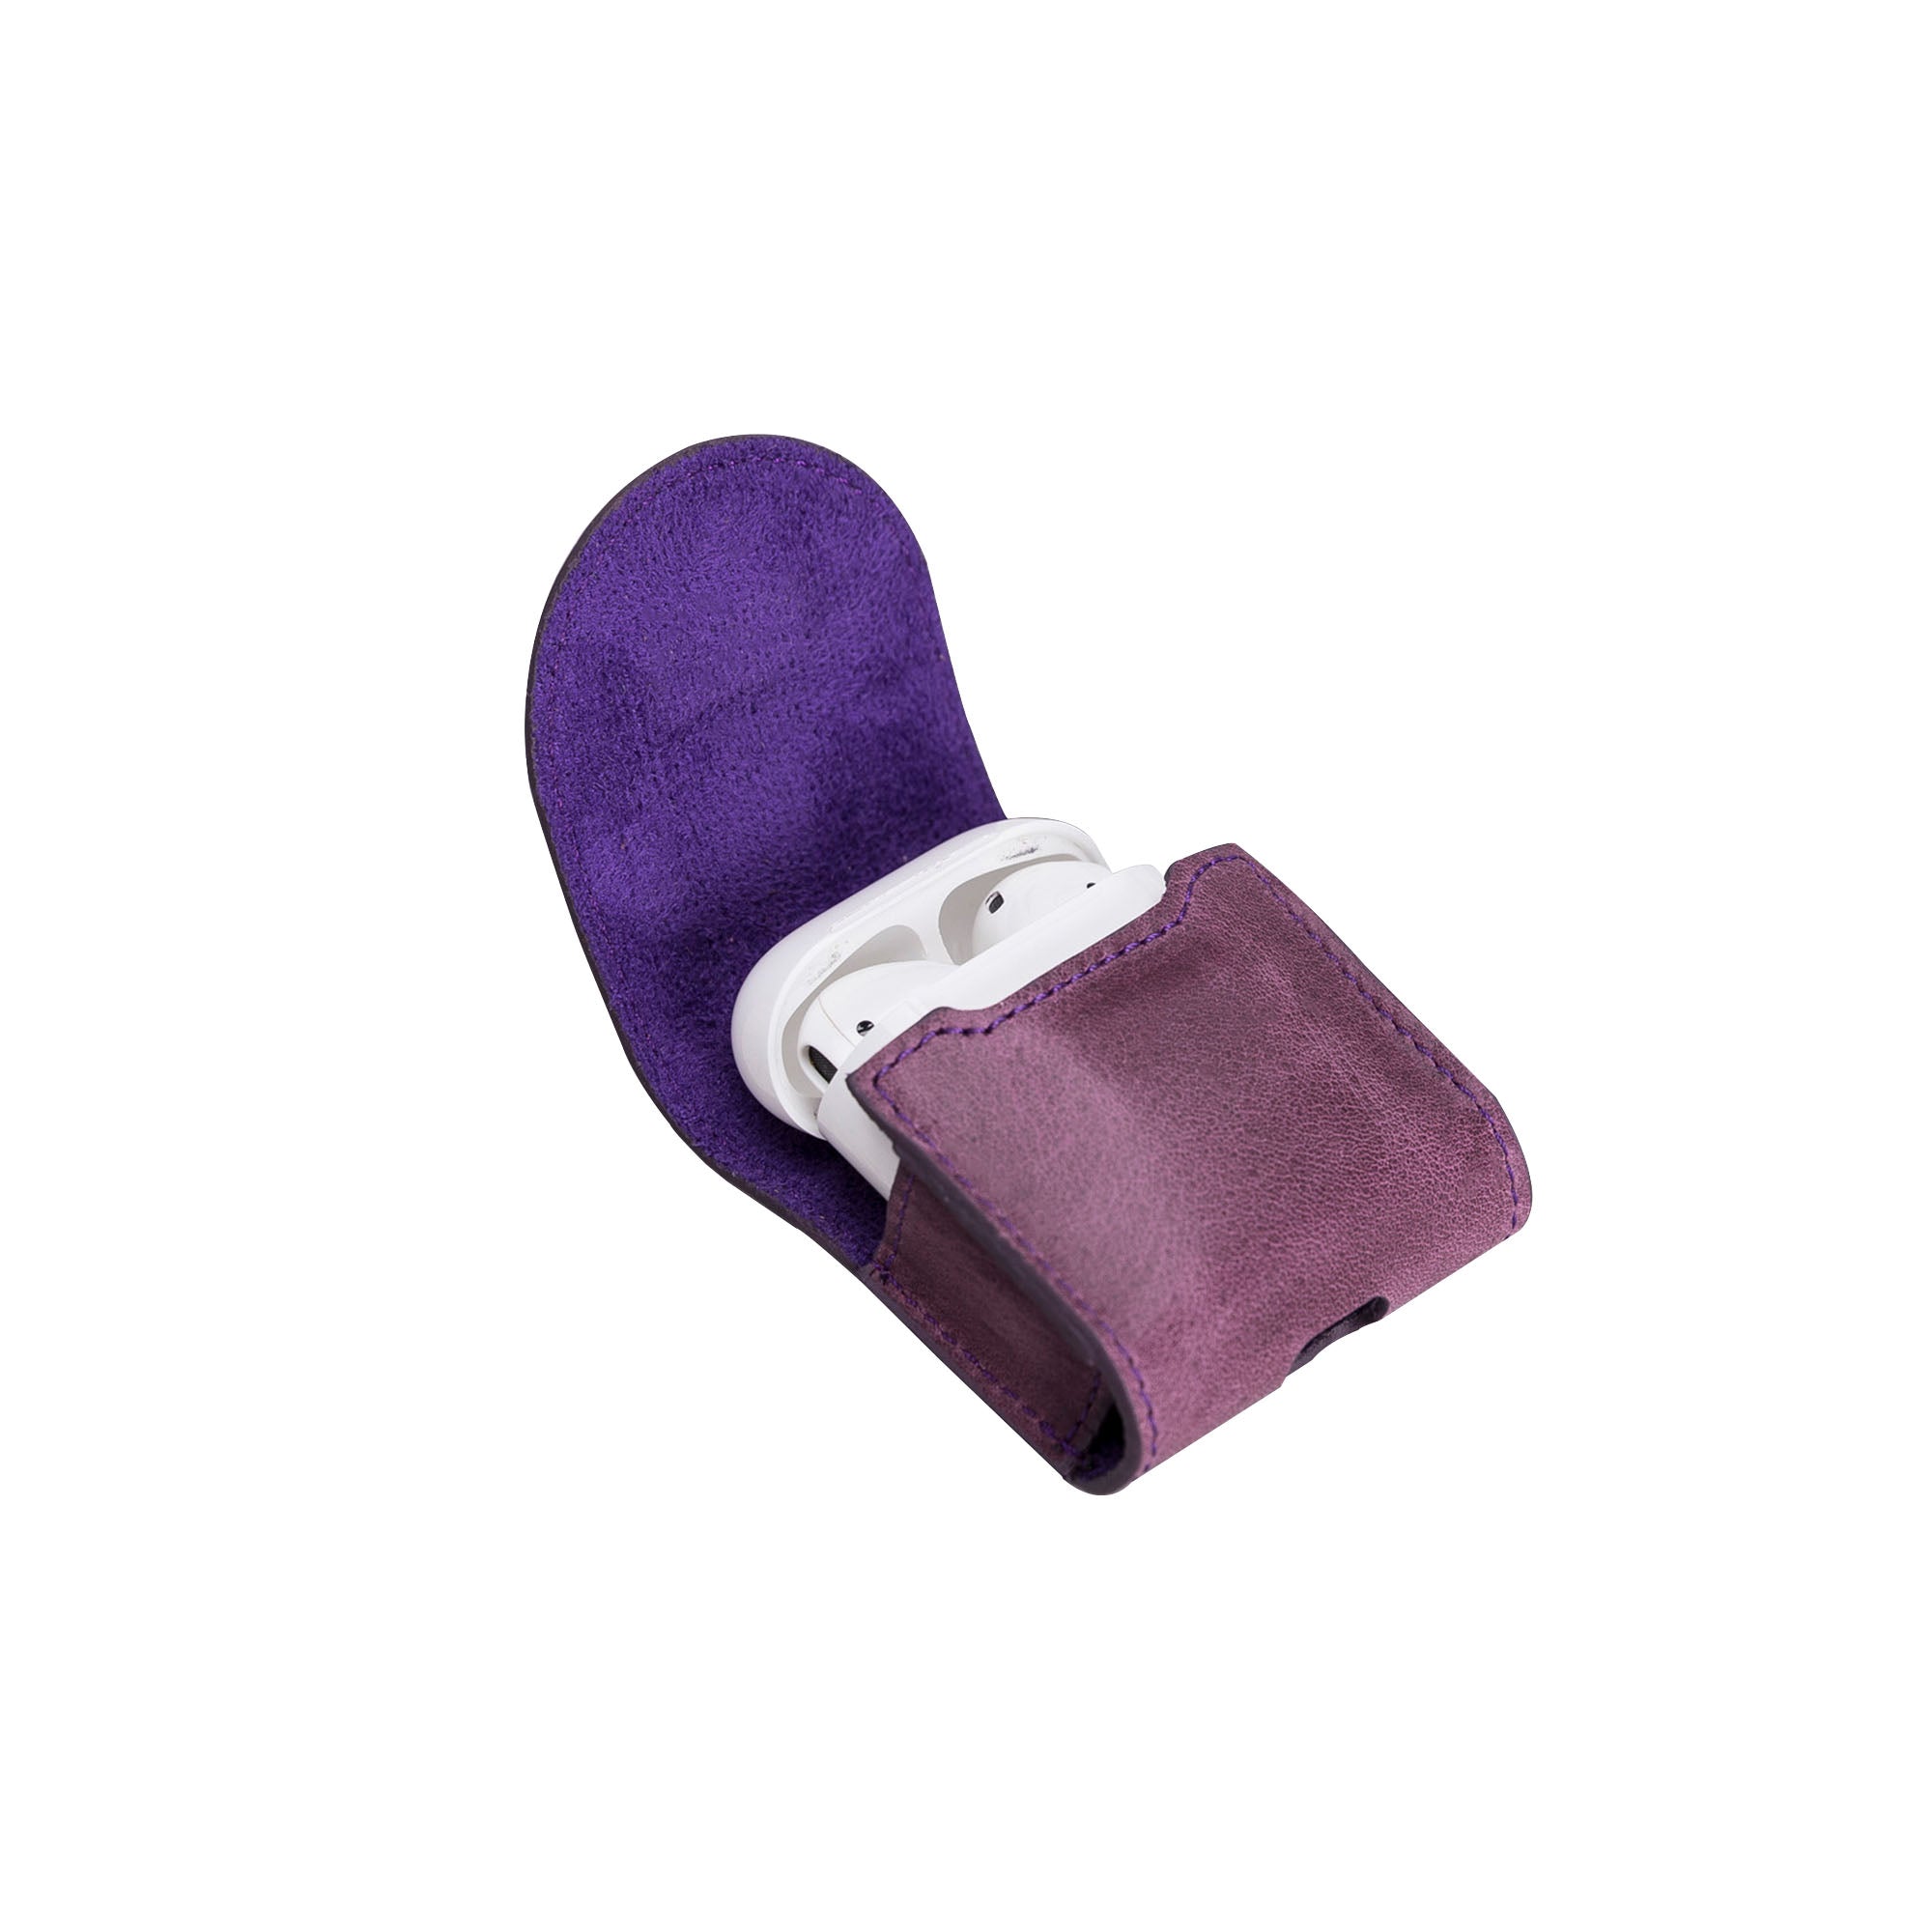 Mai Magnet Leather Case for AirPods 1 & 2 - PURPLE - saracleather